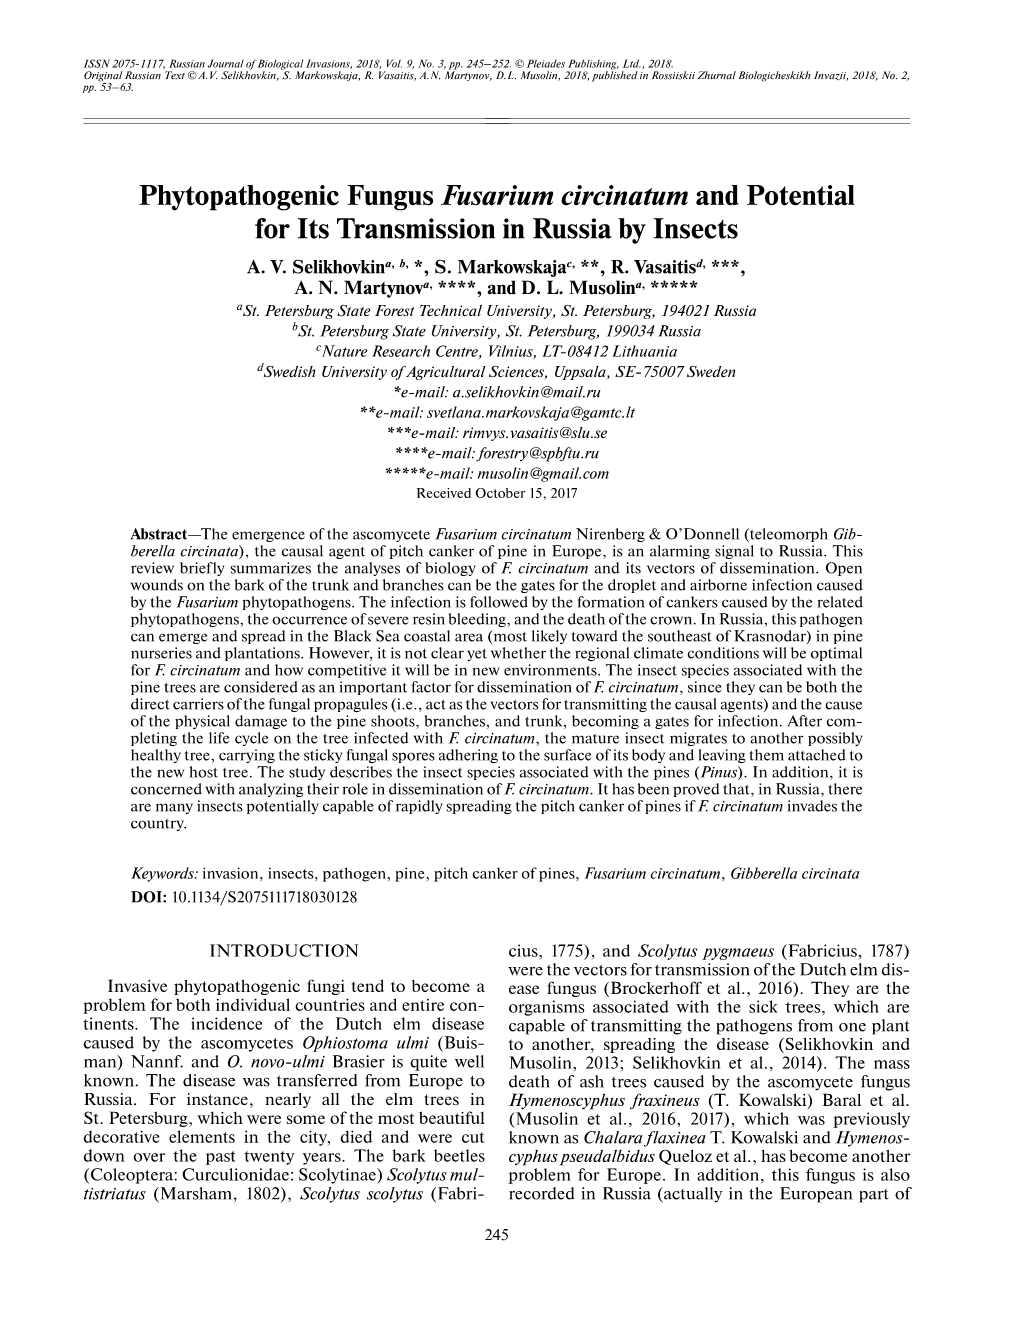 Phytopathogenic Fungus Fusarium Circinatum and Potential for Its Transmission in Russia by Insects A